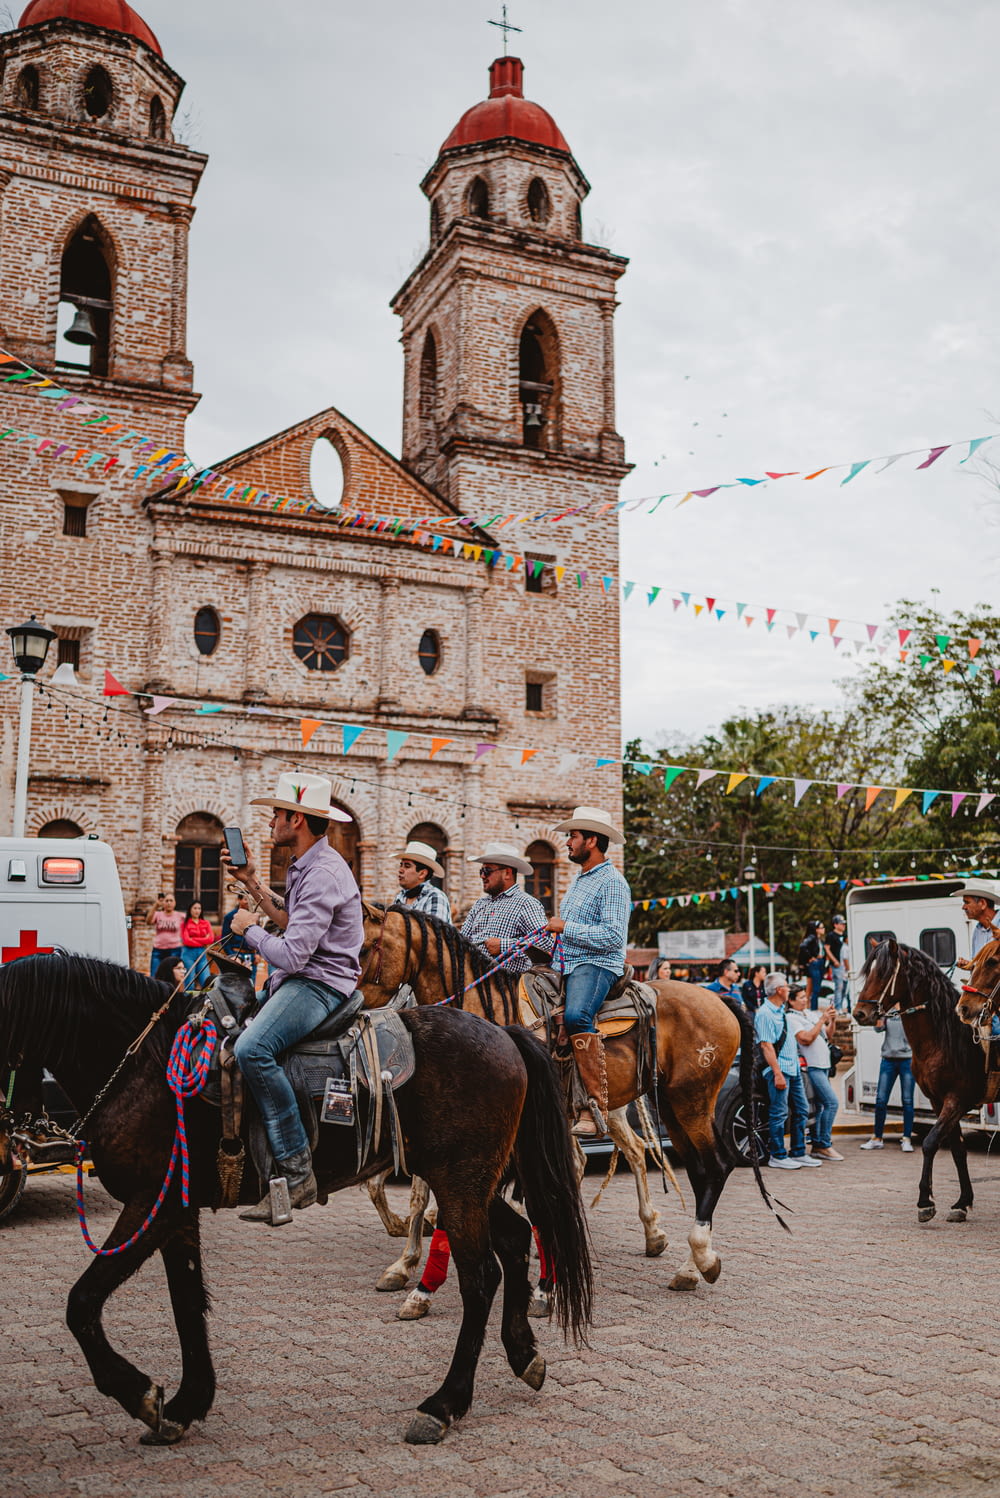 a group of people riding horses in front of a church